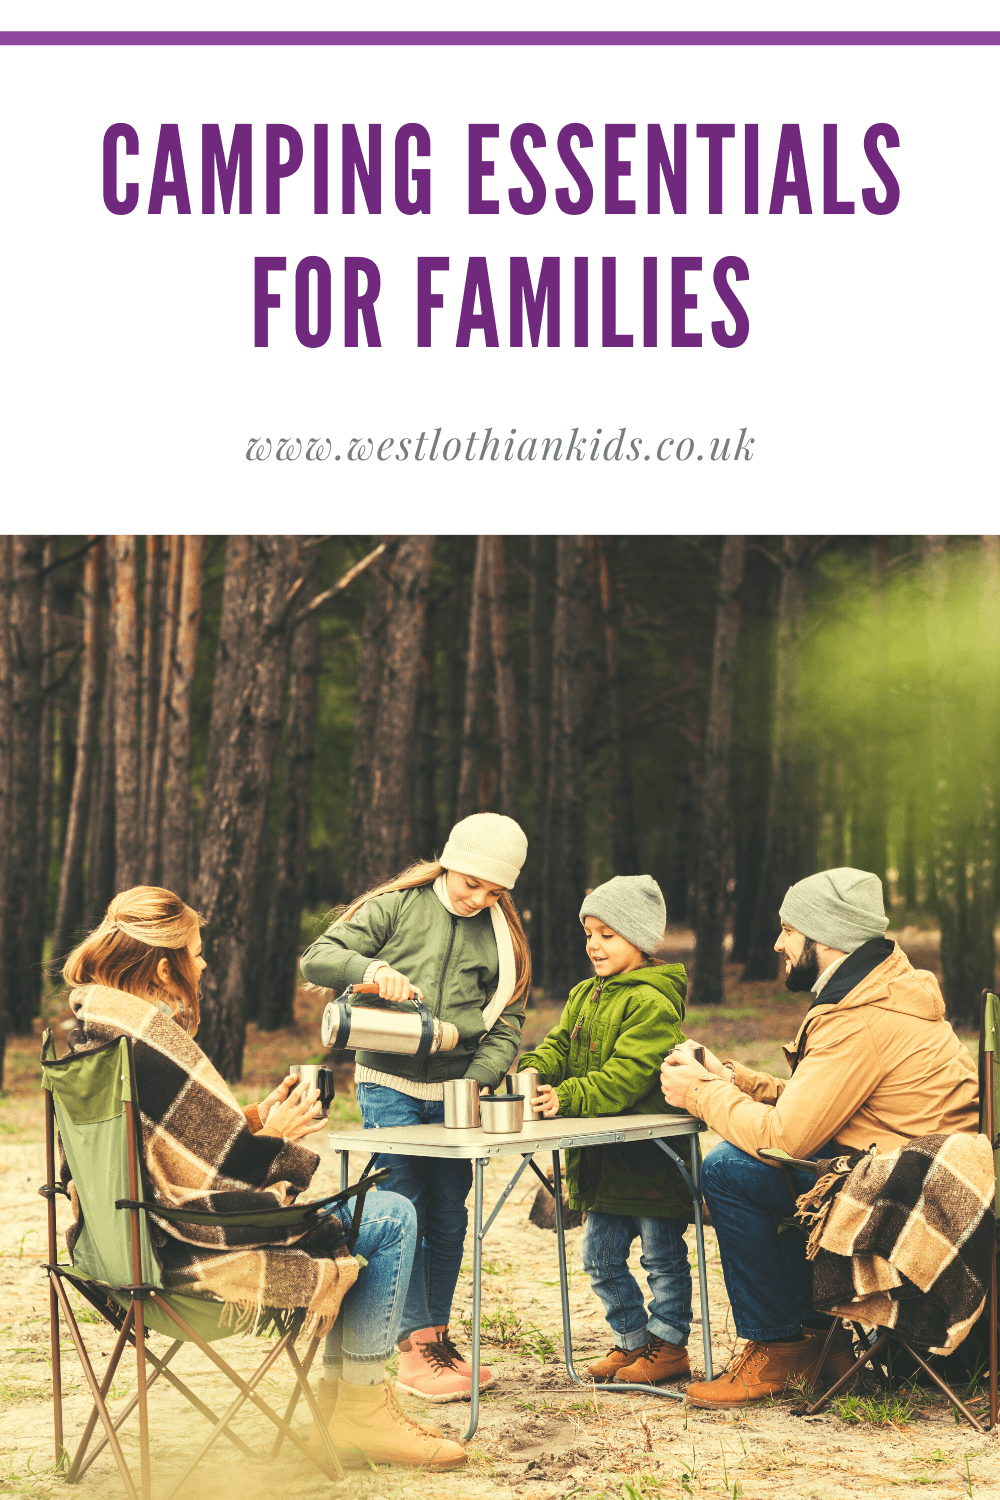 Camping essentials for families